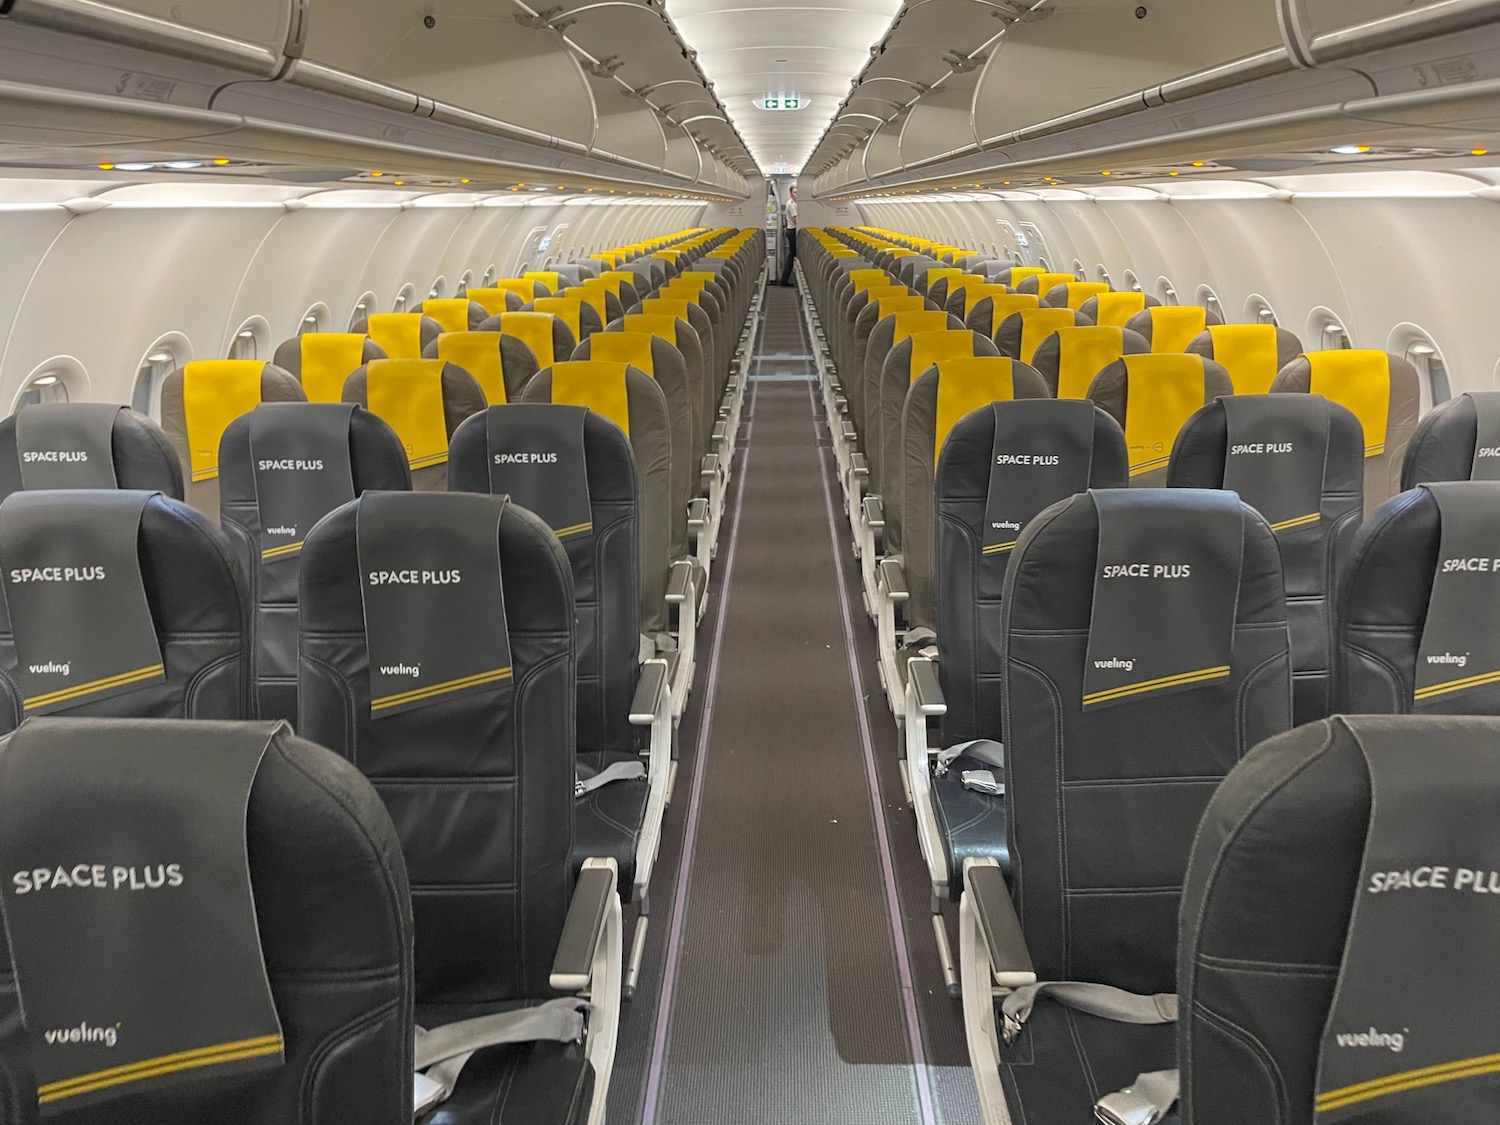 Review Vueling A320 Economy Class Live and Let's Fly